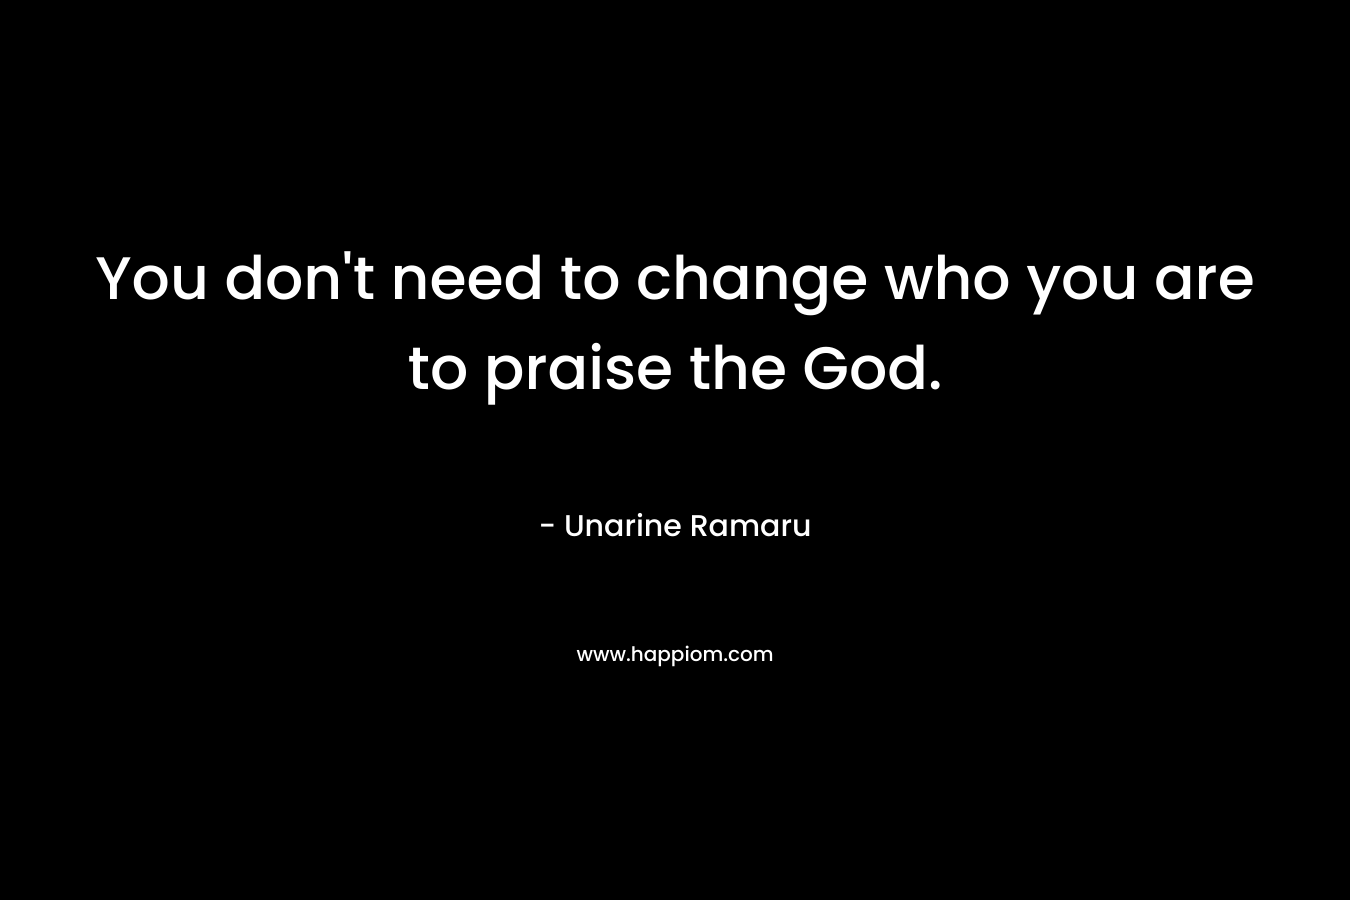 You don't need to change who you are to praise the God.